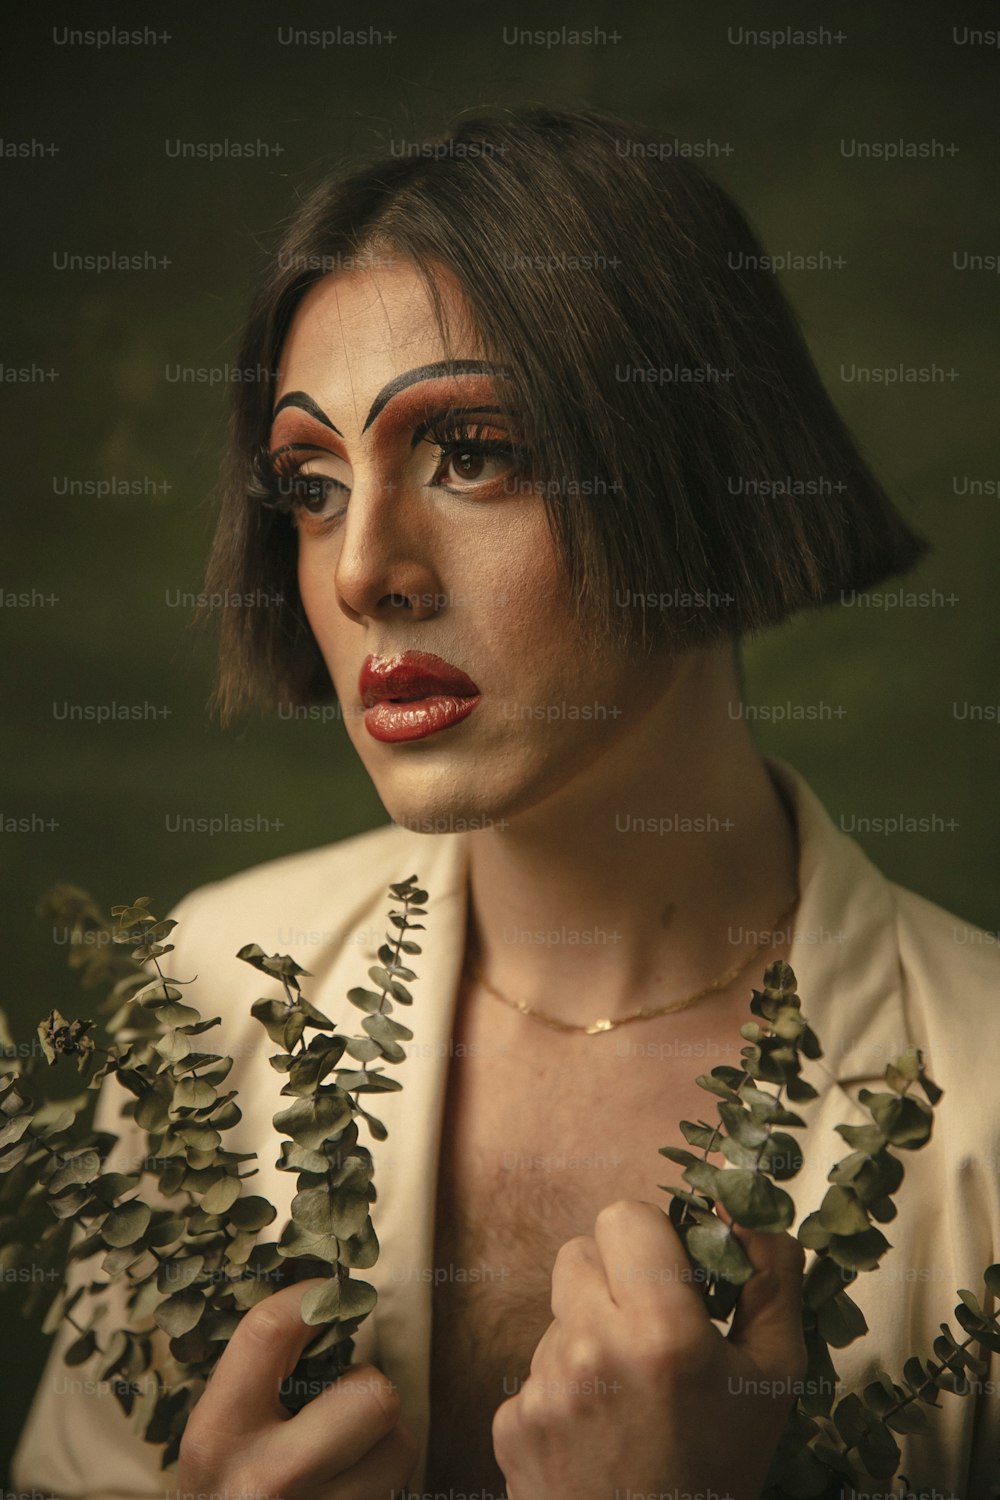 a woman with makeup on her face holding a plant